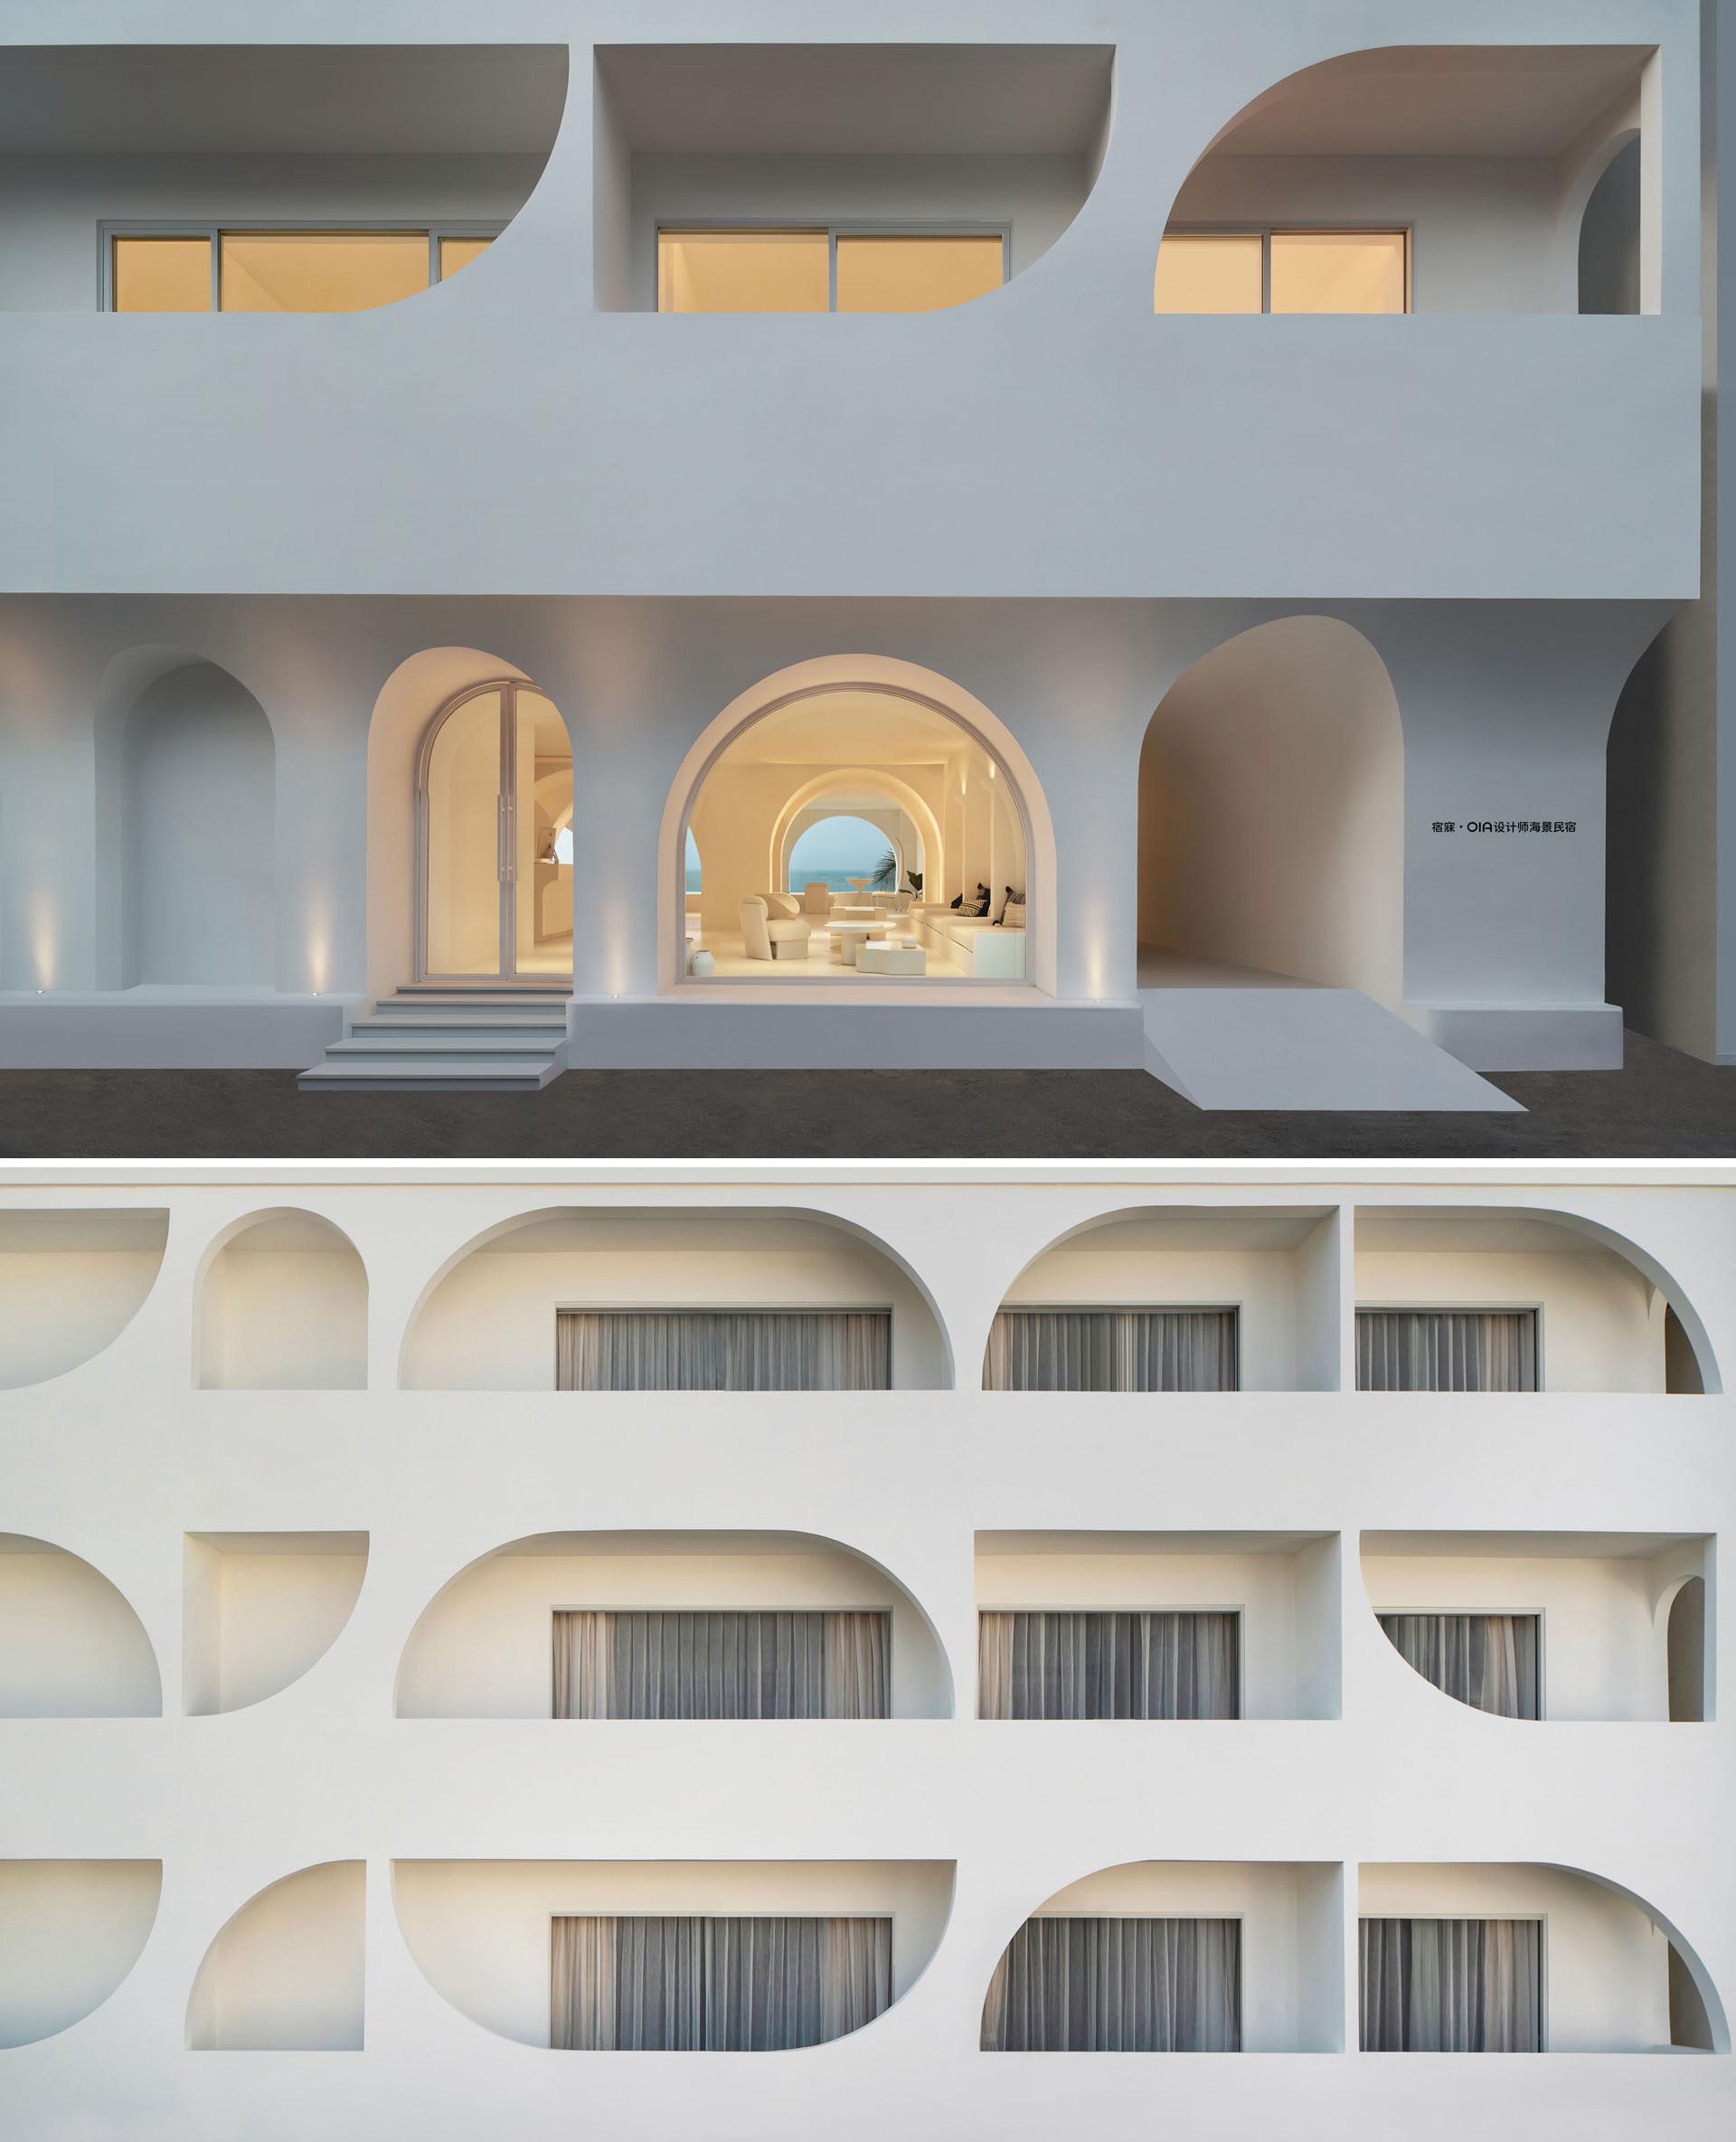 This modern hotel rests right on the beachfront, and showcases differently sized arches, glass railings, and a minimalist exterior with a white finish.